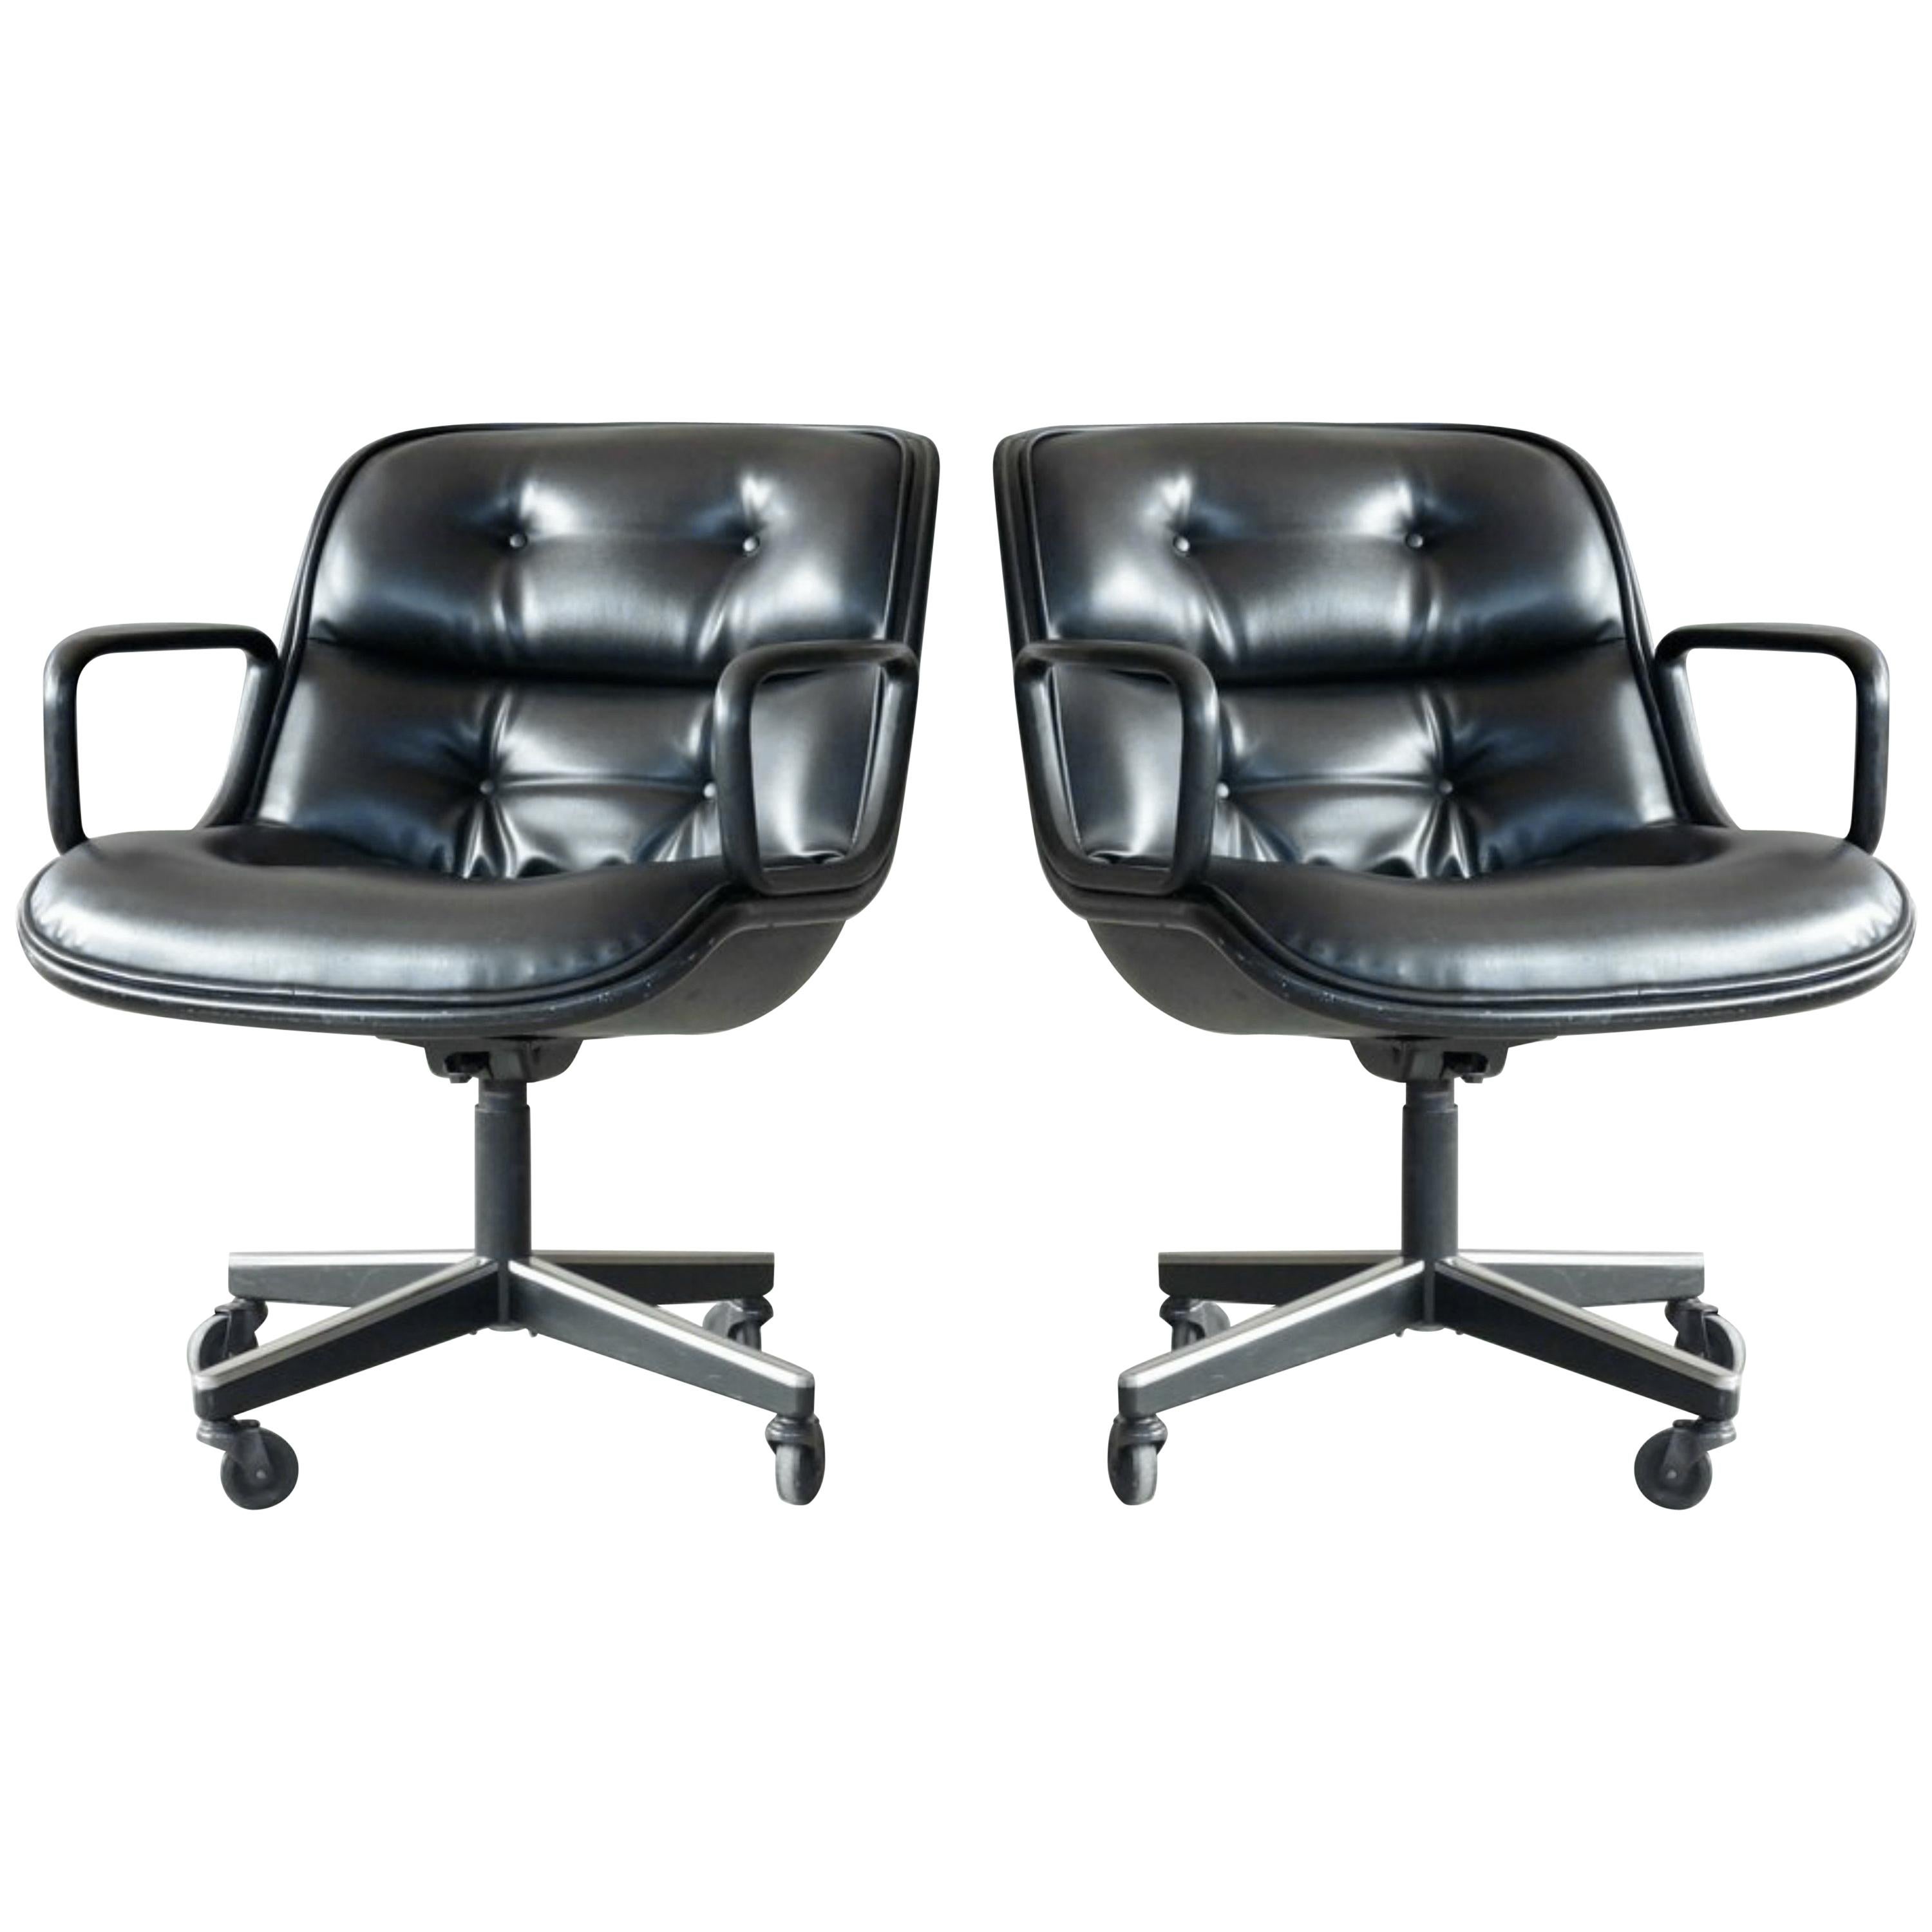 Pair of Charles Pollock Executive Chairs in Leather for Knoll International